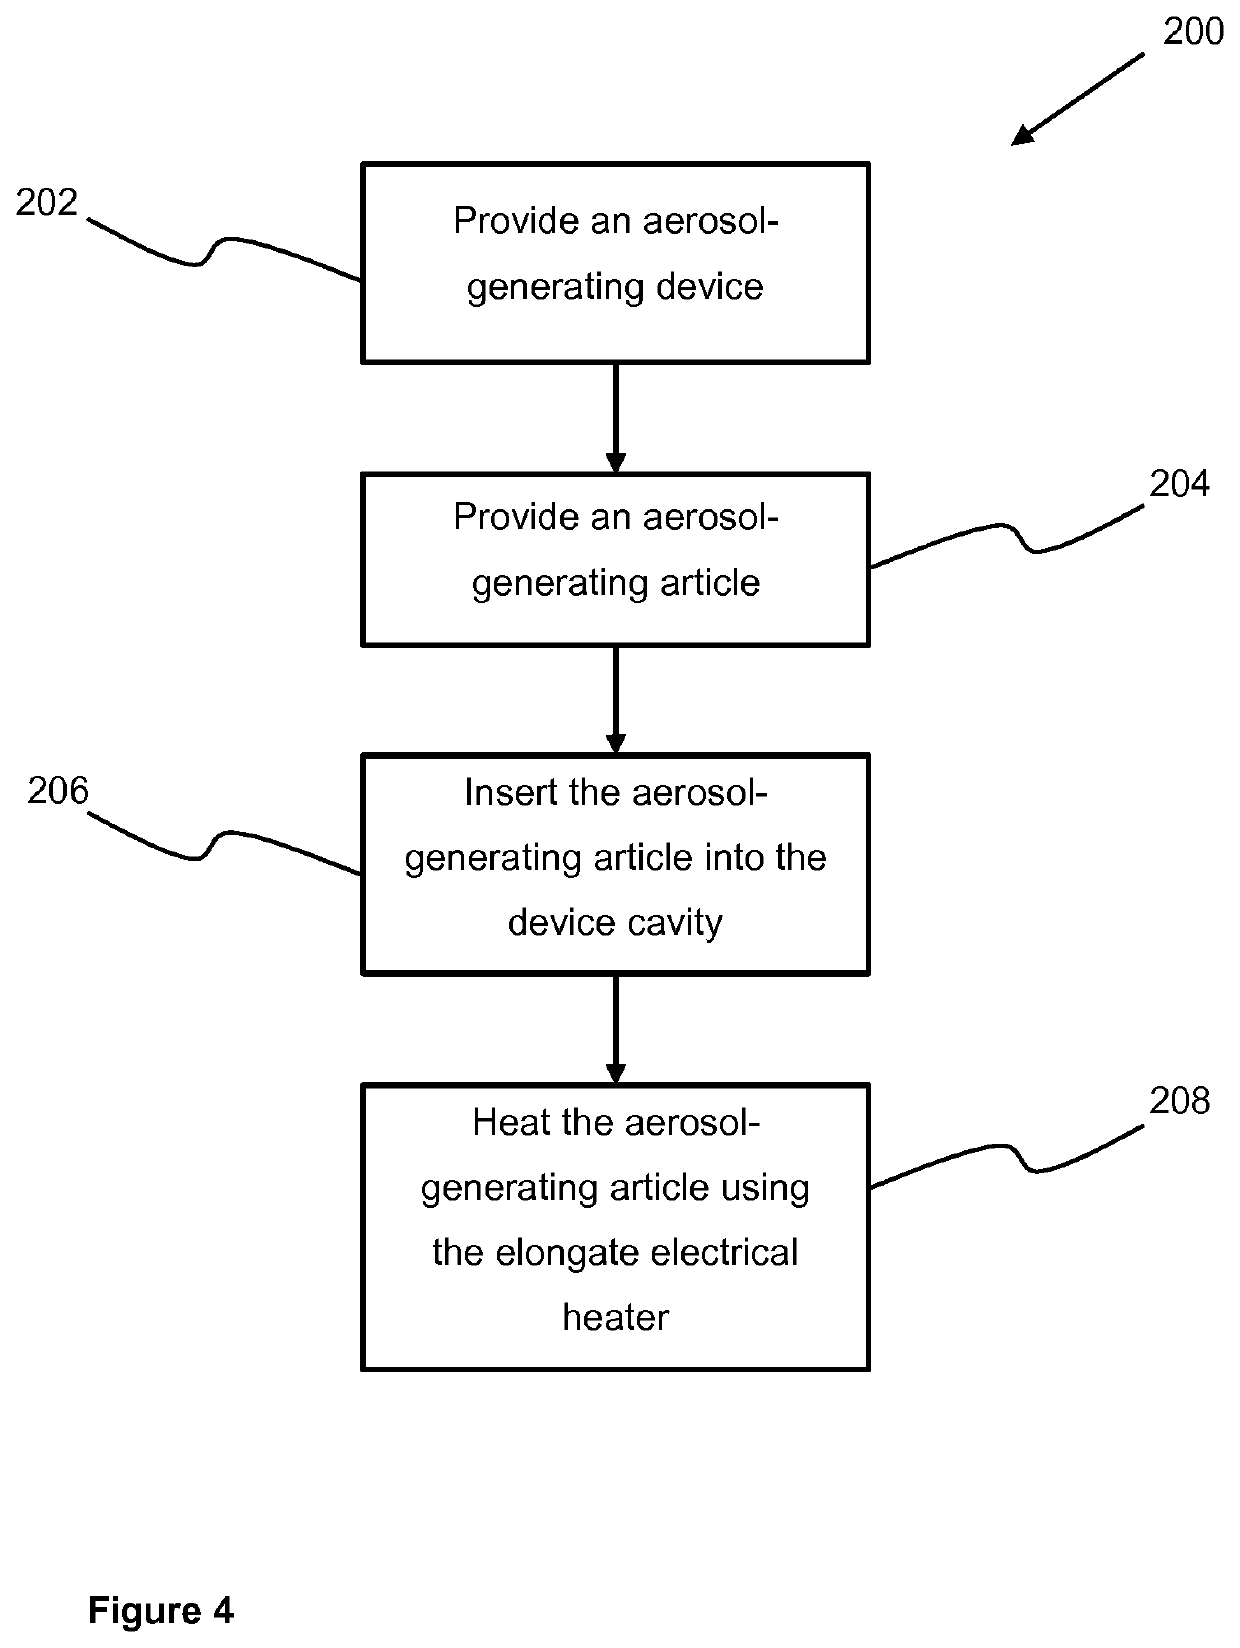 Heater assembly with cavity filled with a potting compound